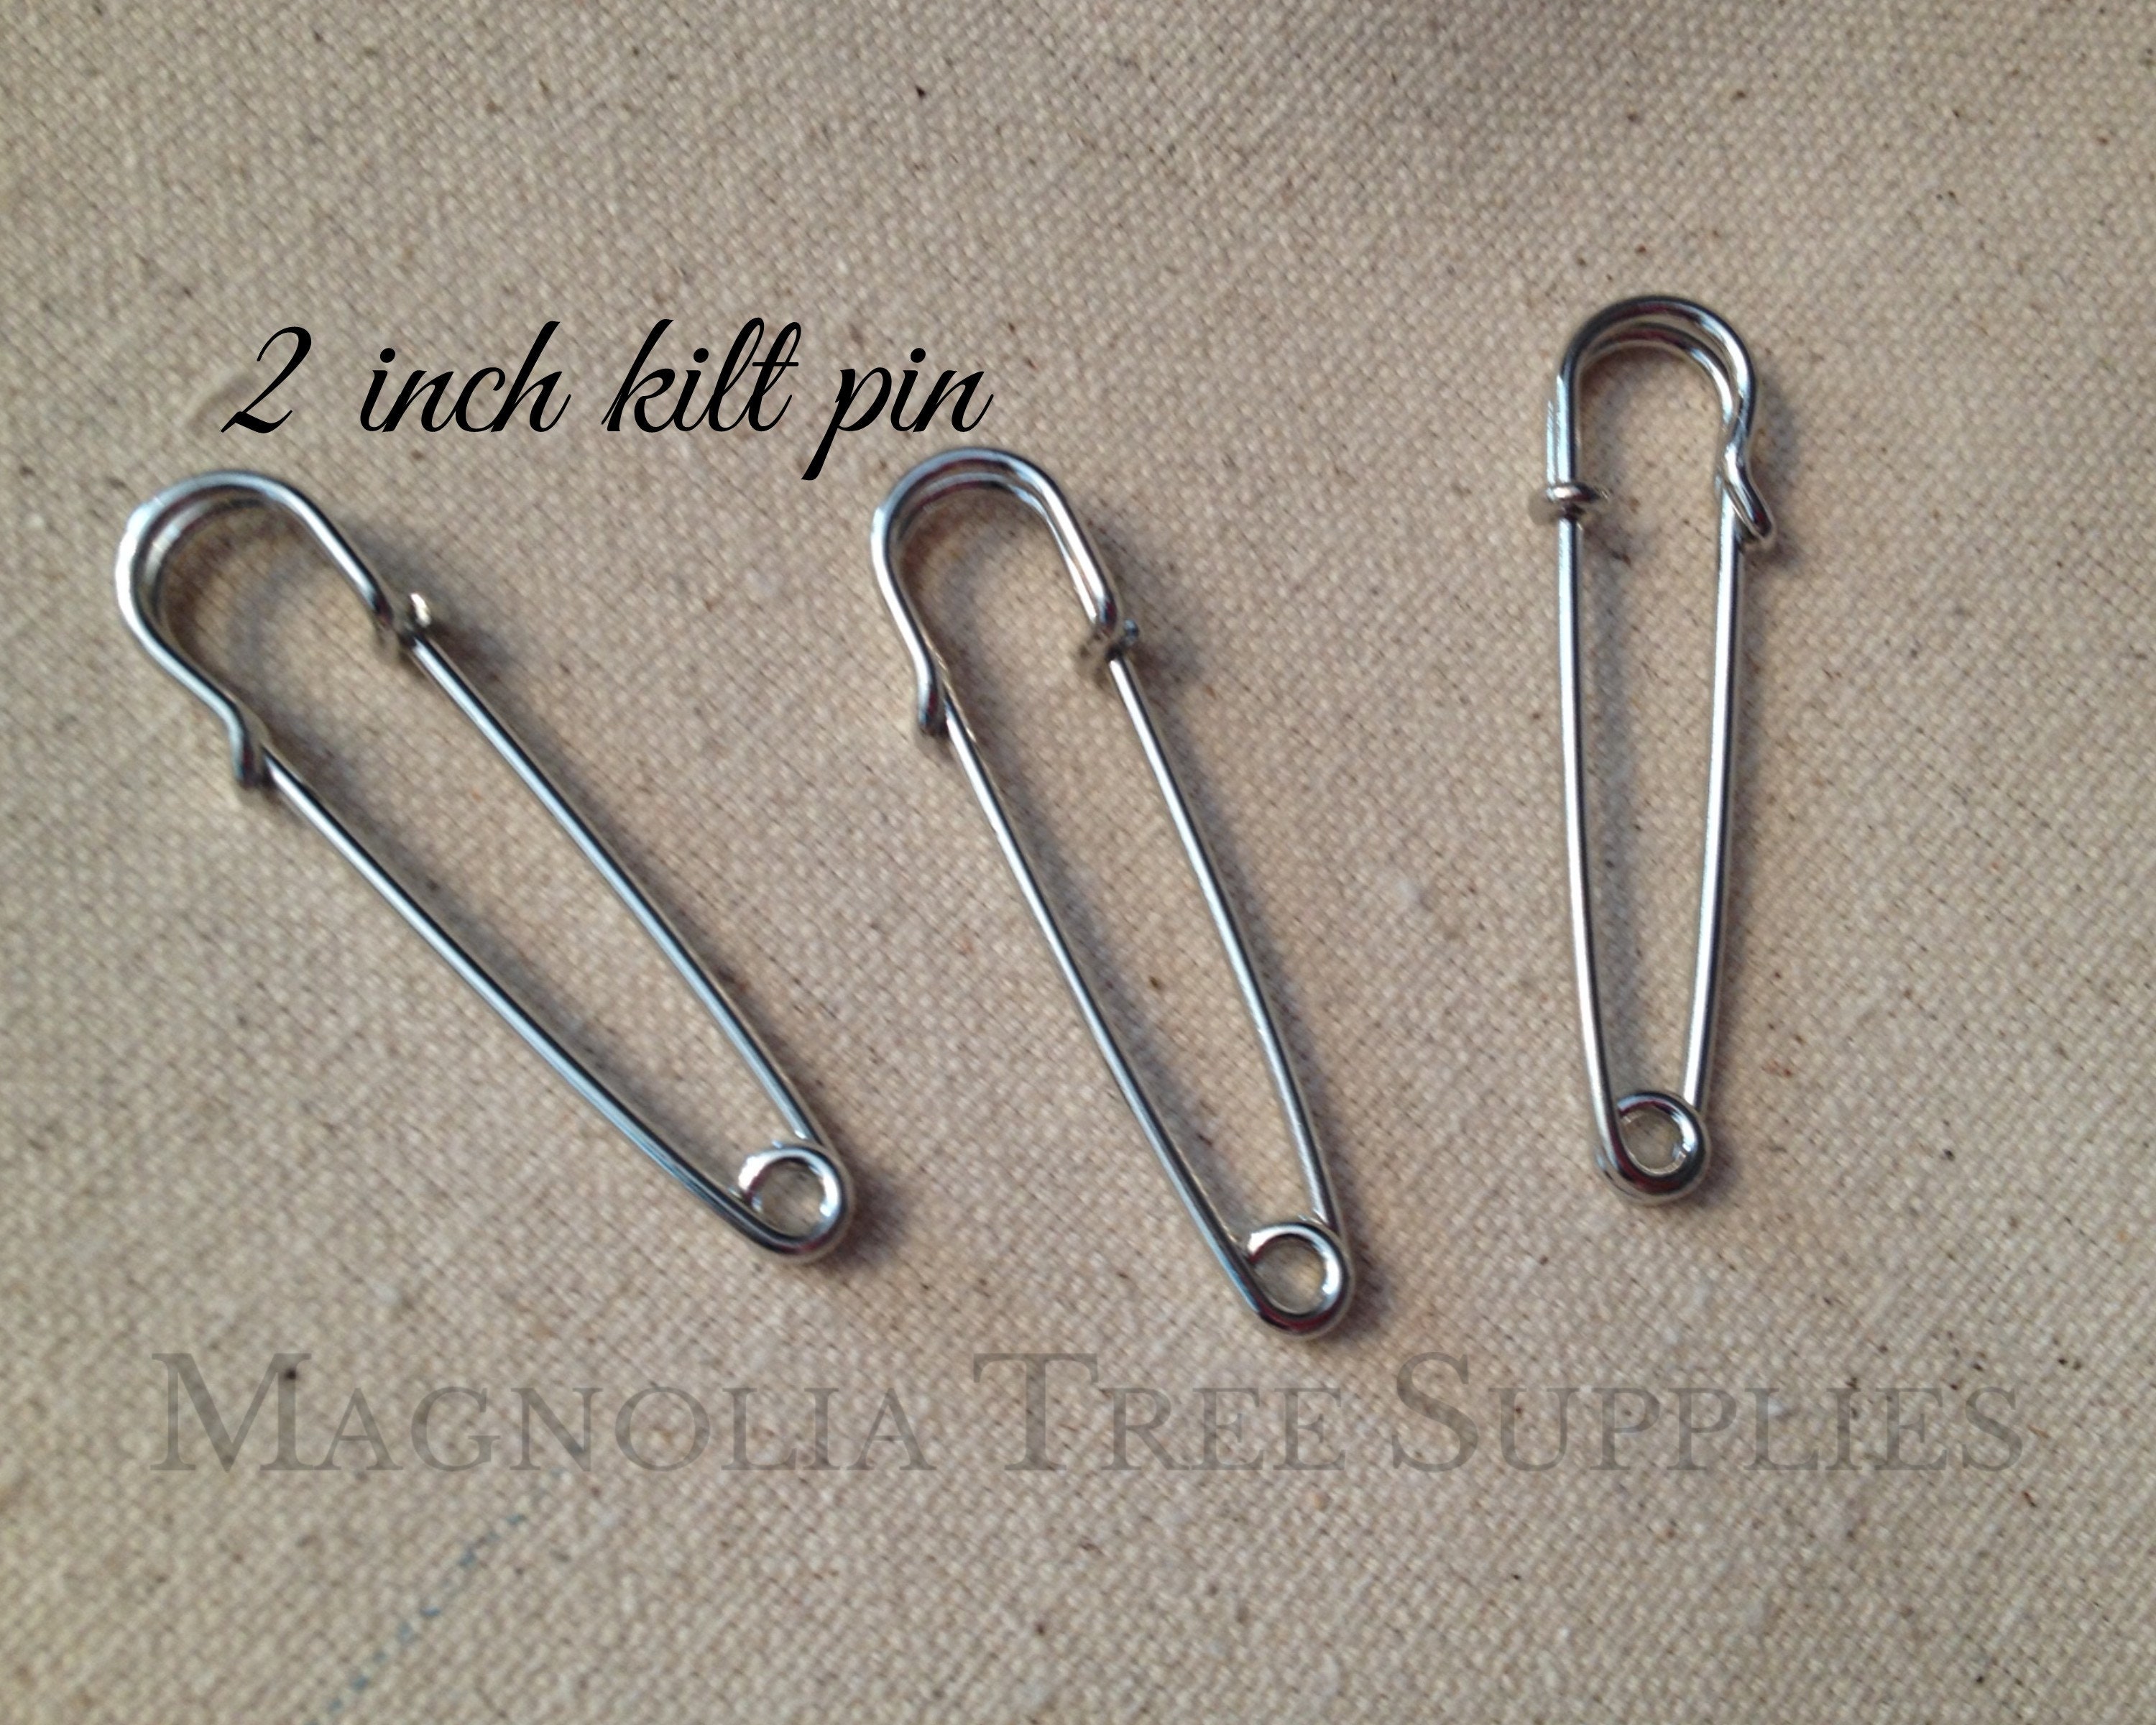 HooAMI 2 Inch Safety Pins Heavy Duty Safety Pin Brooch Pins with 5 Holes  for Blankets, Skirts, Kilts, Knitted Fabric, Crafts 30pcs